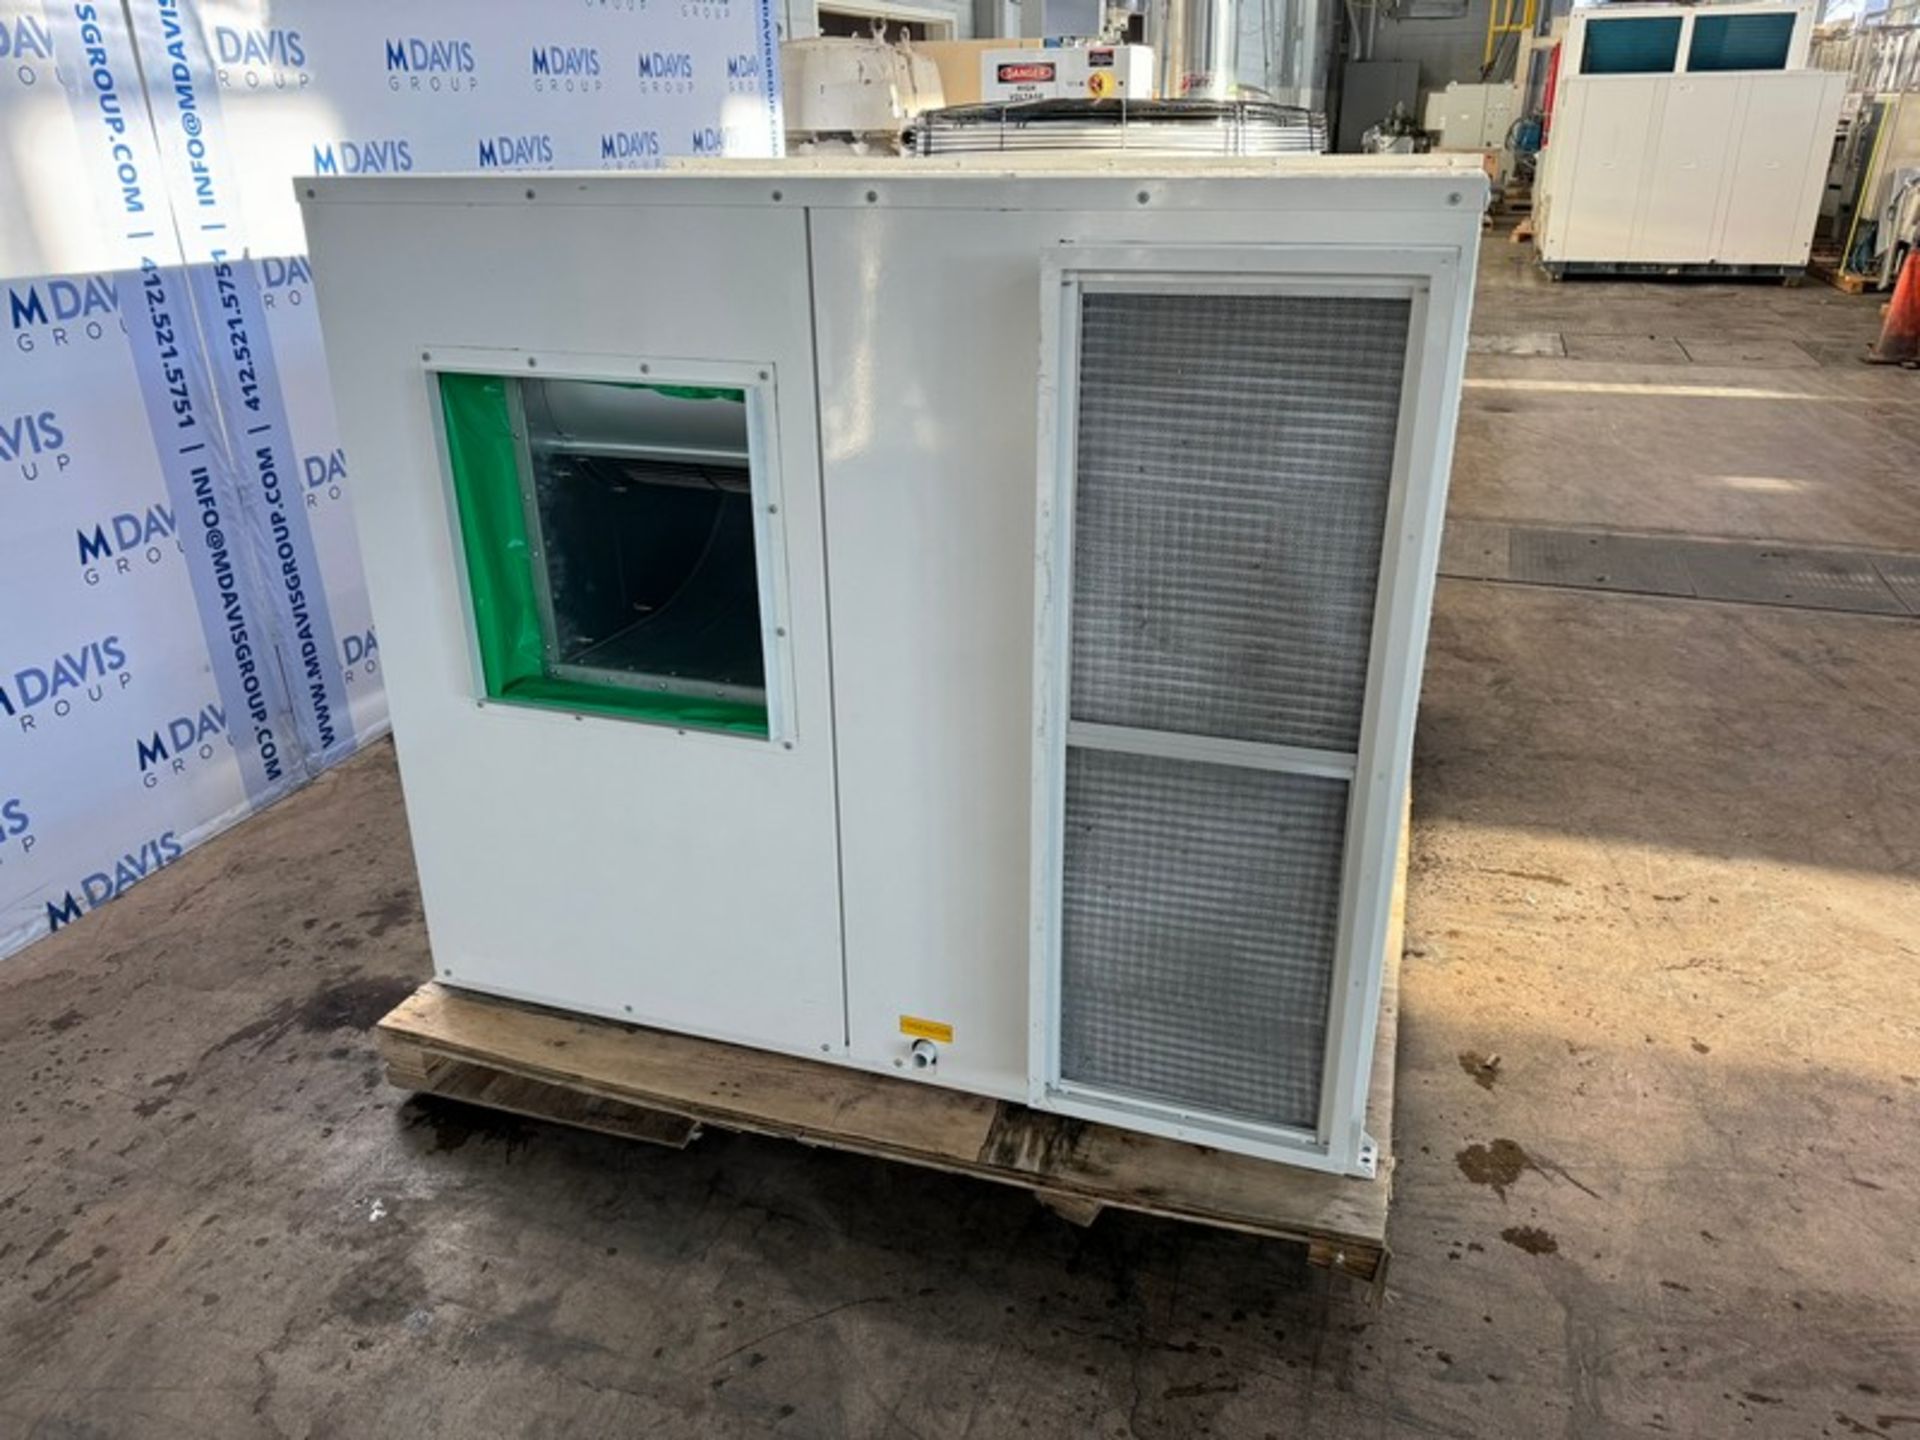 NEW 2022 SHENHLIN Roof Mounted Air Cooled Package Unit, S/N C5020221018R001, Cooling Capacity 70 kW, - Image 3 of 7